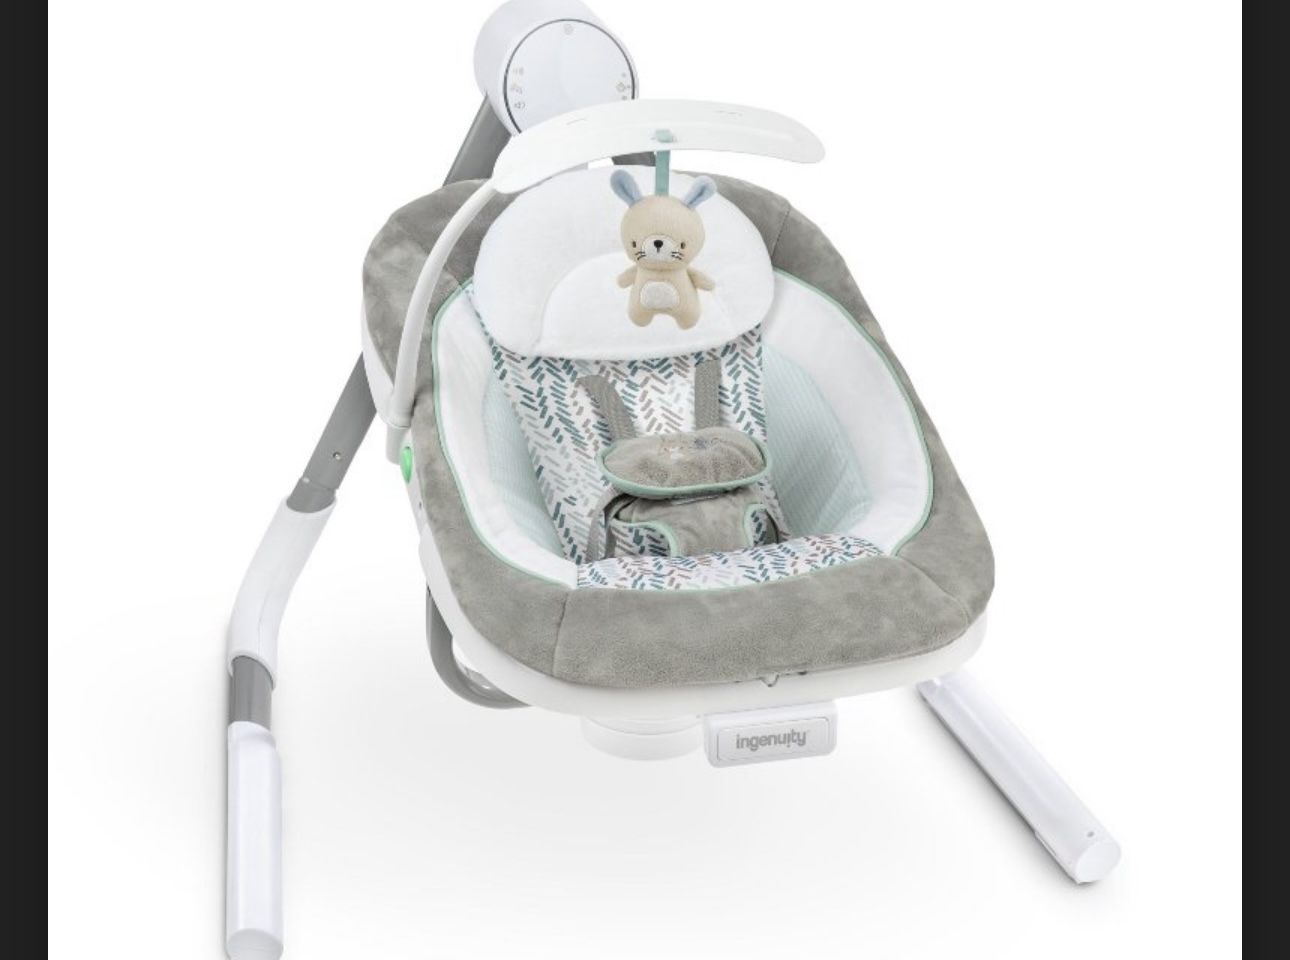 Ingenuity AnyWay swing multi-direction Portable Baby Swing 